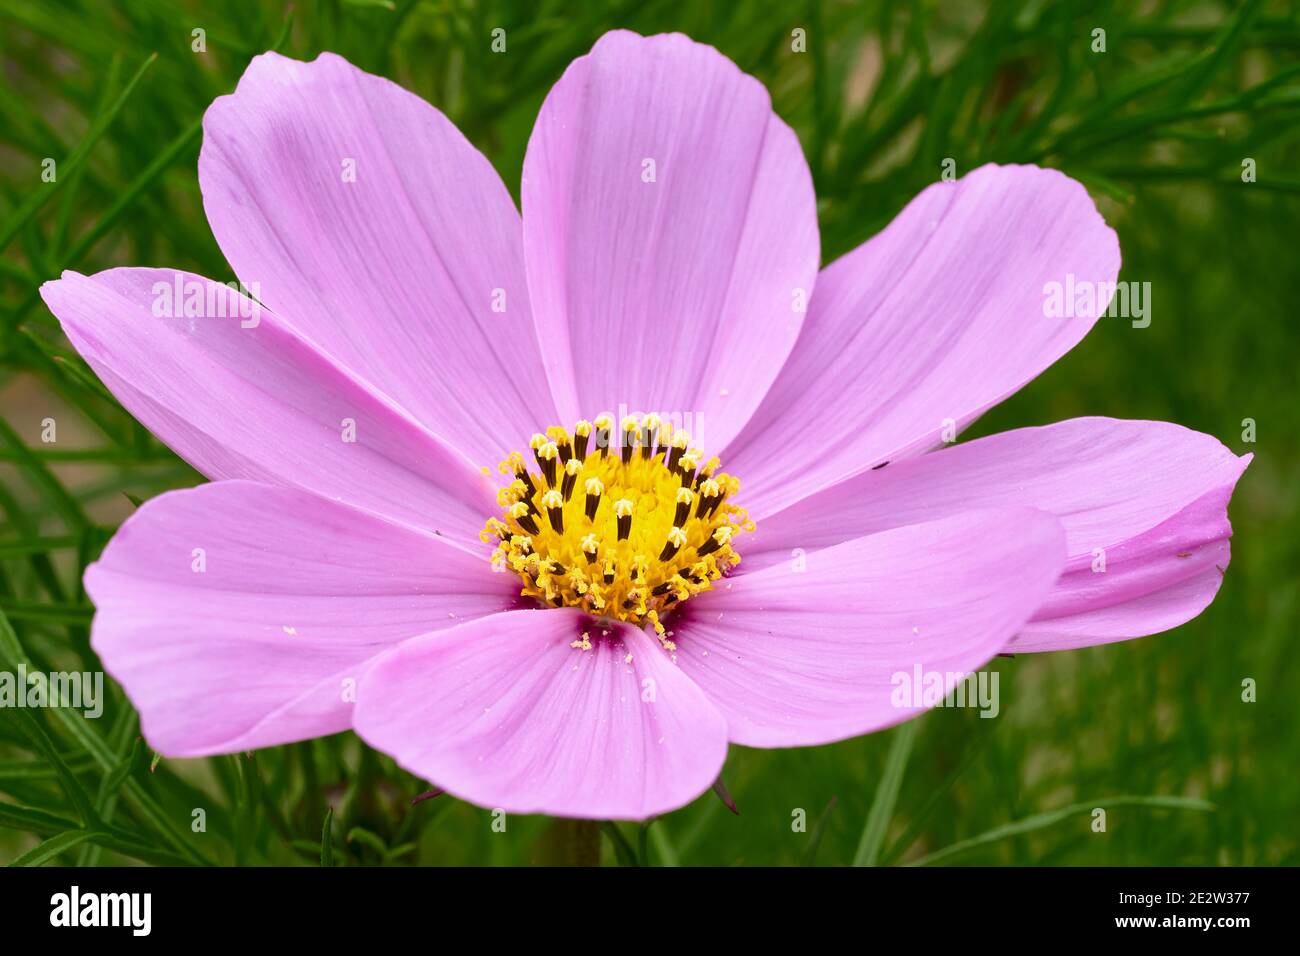 Cosmos flower close up Banque D'Images